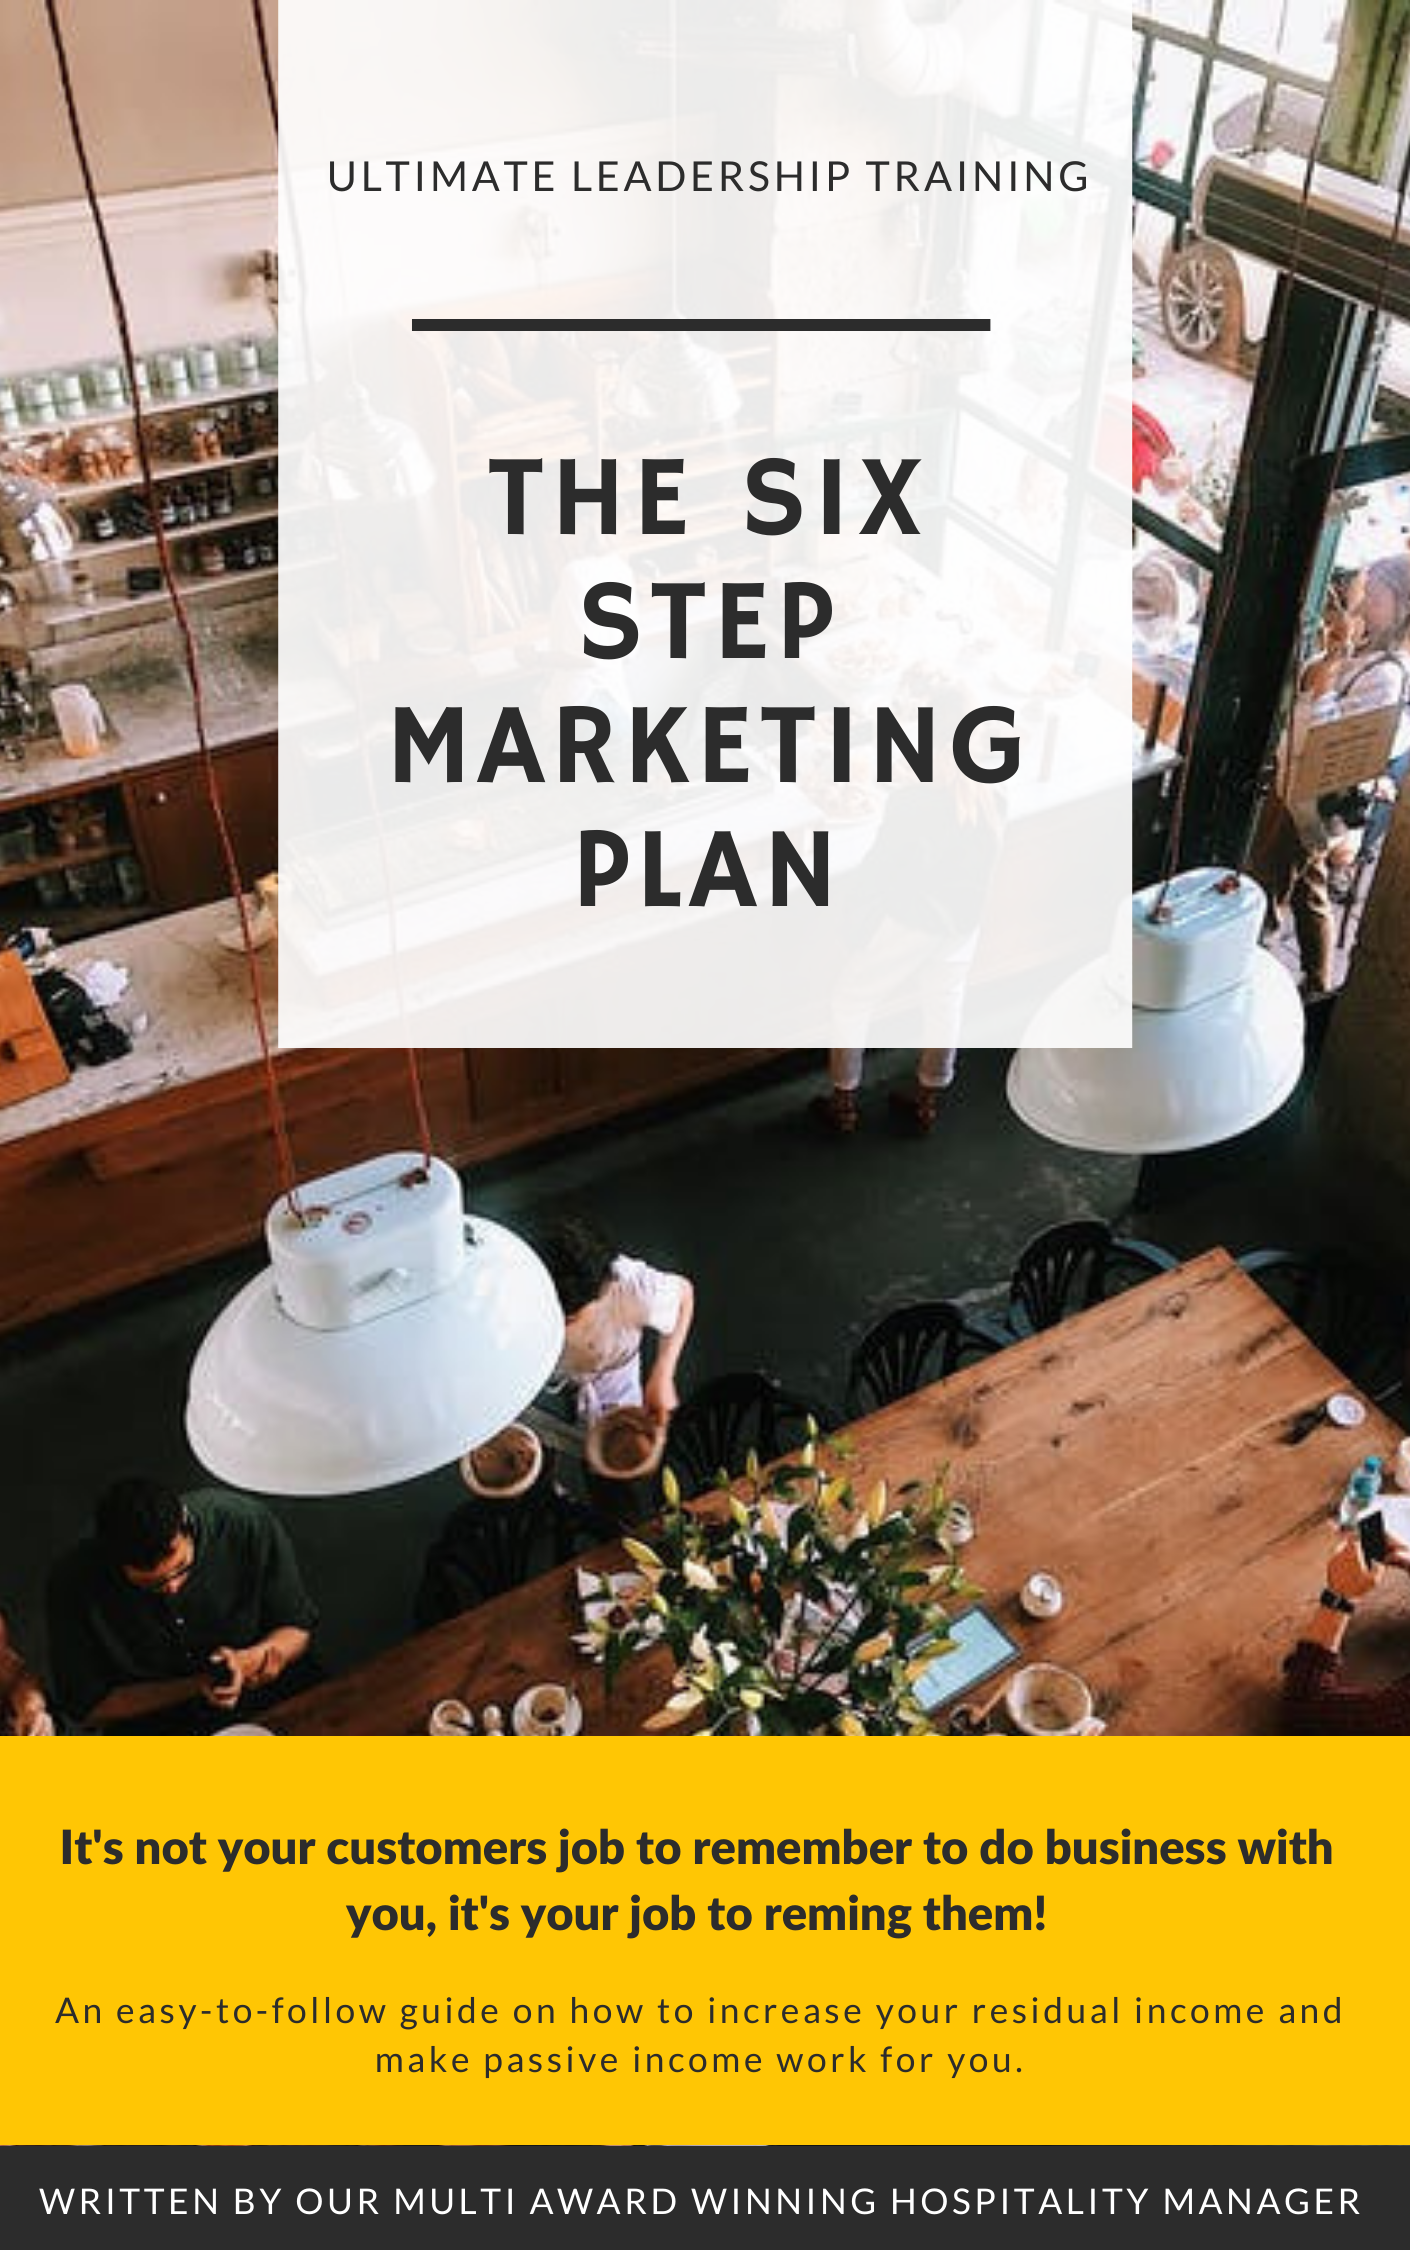 The six step marketing plan for pubs, restaurants and hotels - hospitality marketing